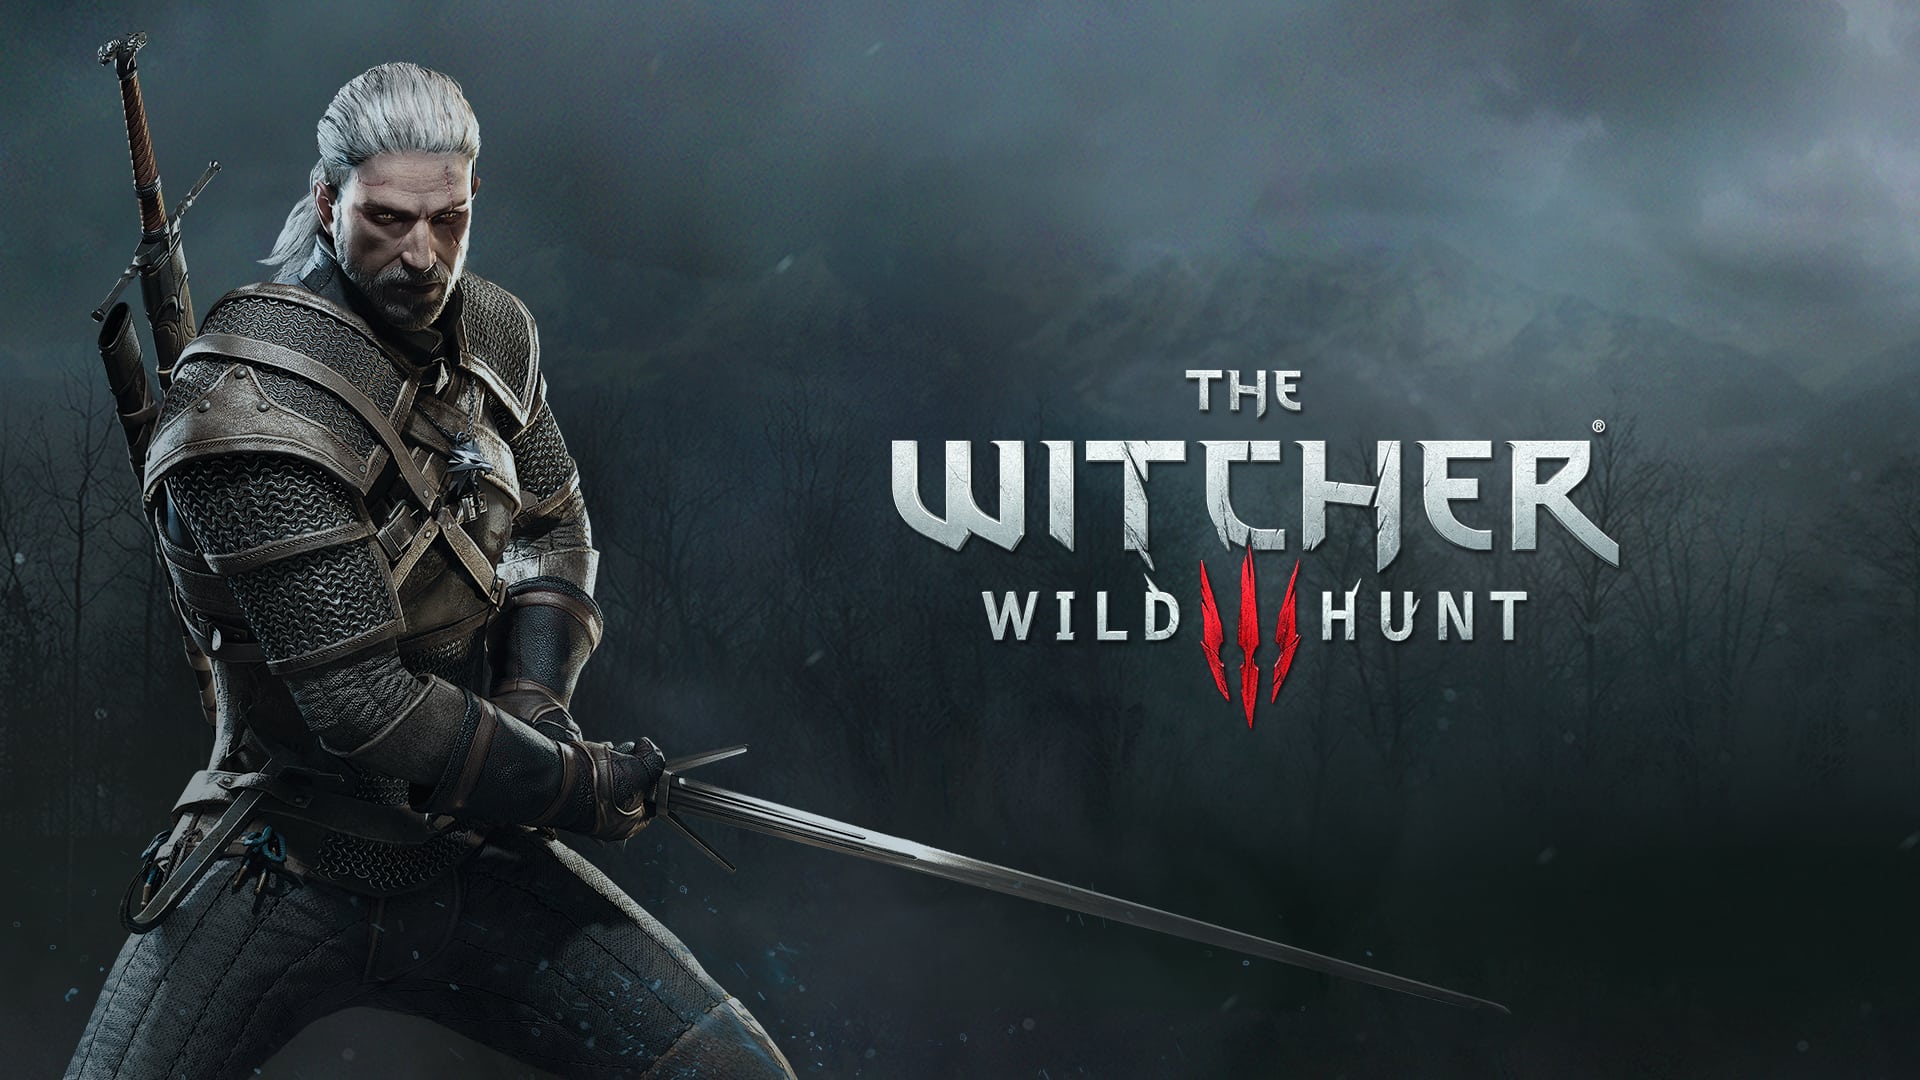 The Witcher 3 Patch 4.04 Details